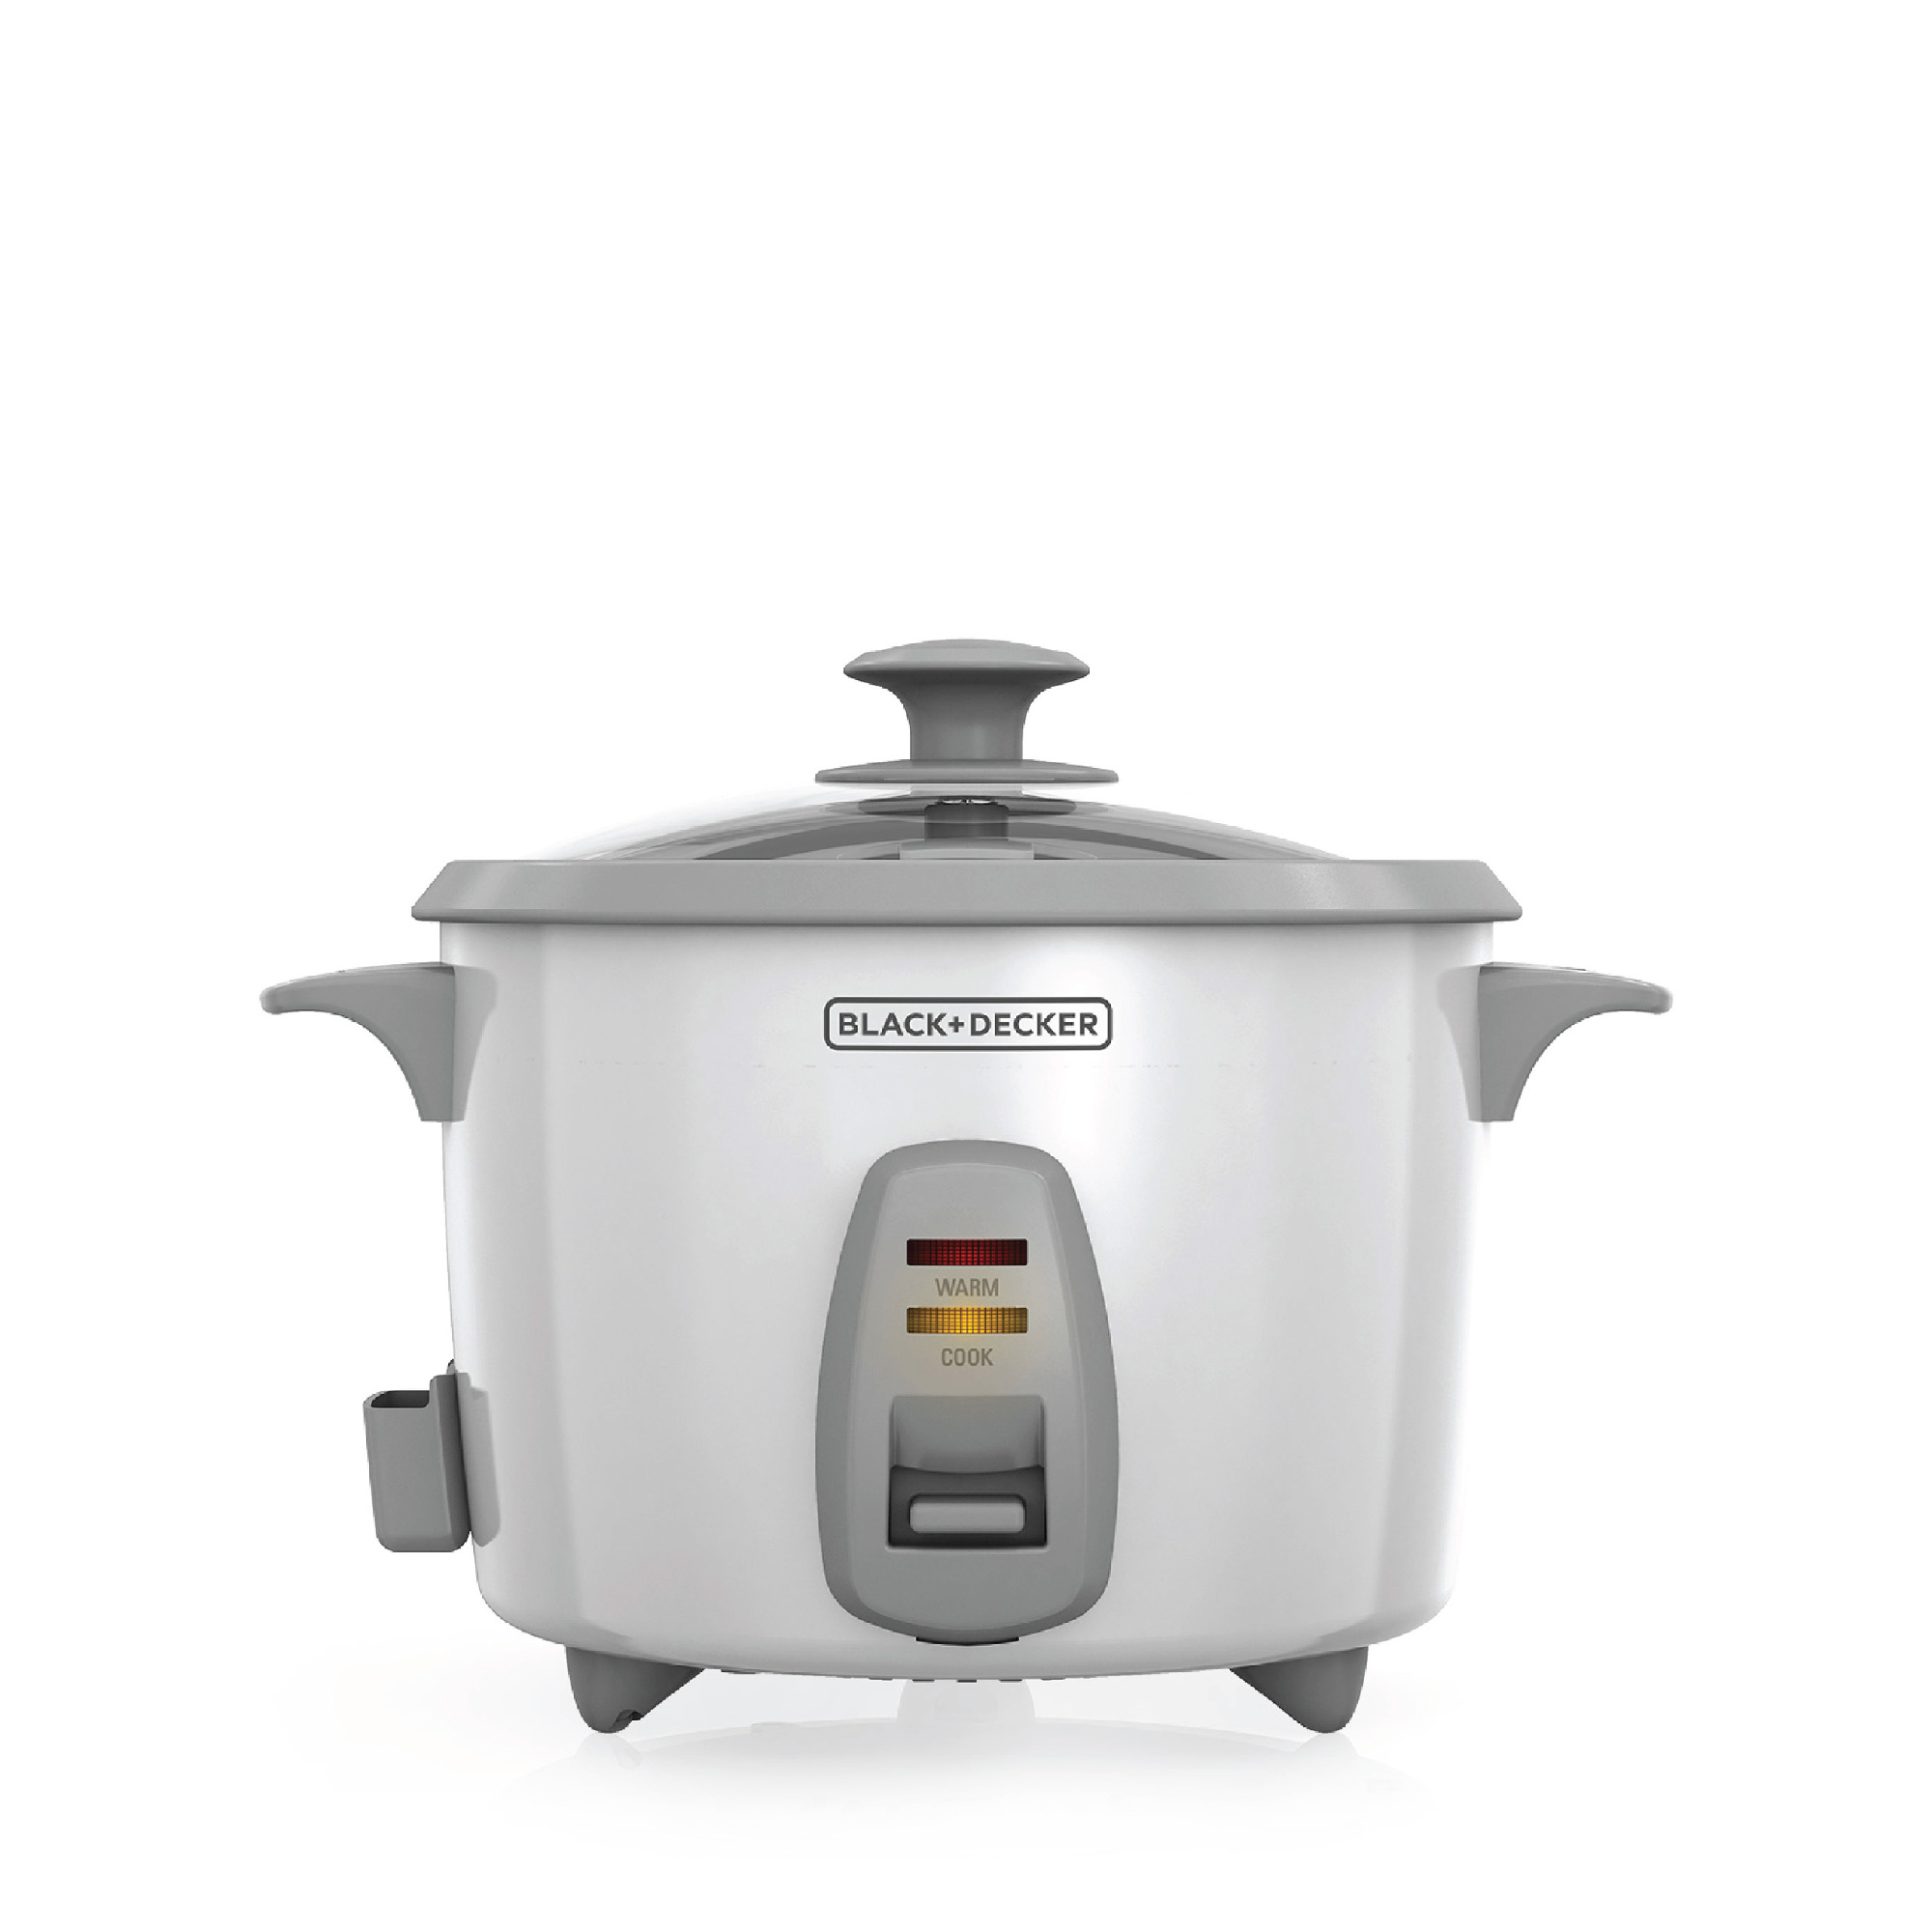 https://s7cdn.spectrumbrands.com/~/media/SmallAppliancesUS/Black%20and%20Decker/Product%20Page/cooking%20appliances/rice%20cookers%20and%20steamers/RC436/riceCookers_RC436.jpg